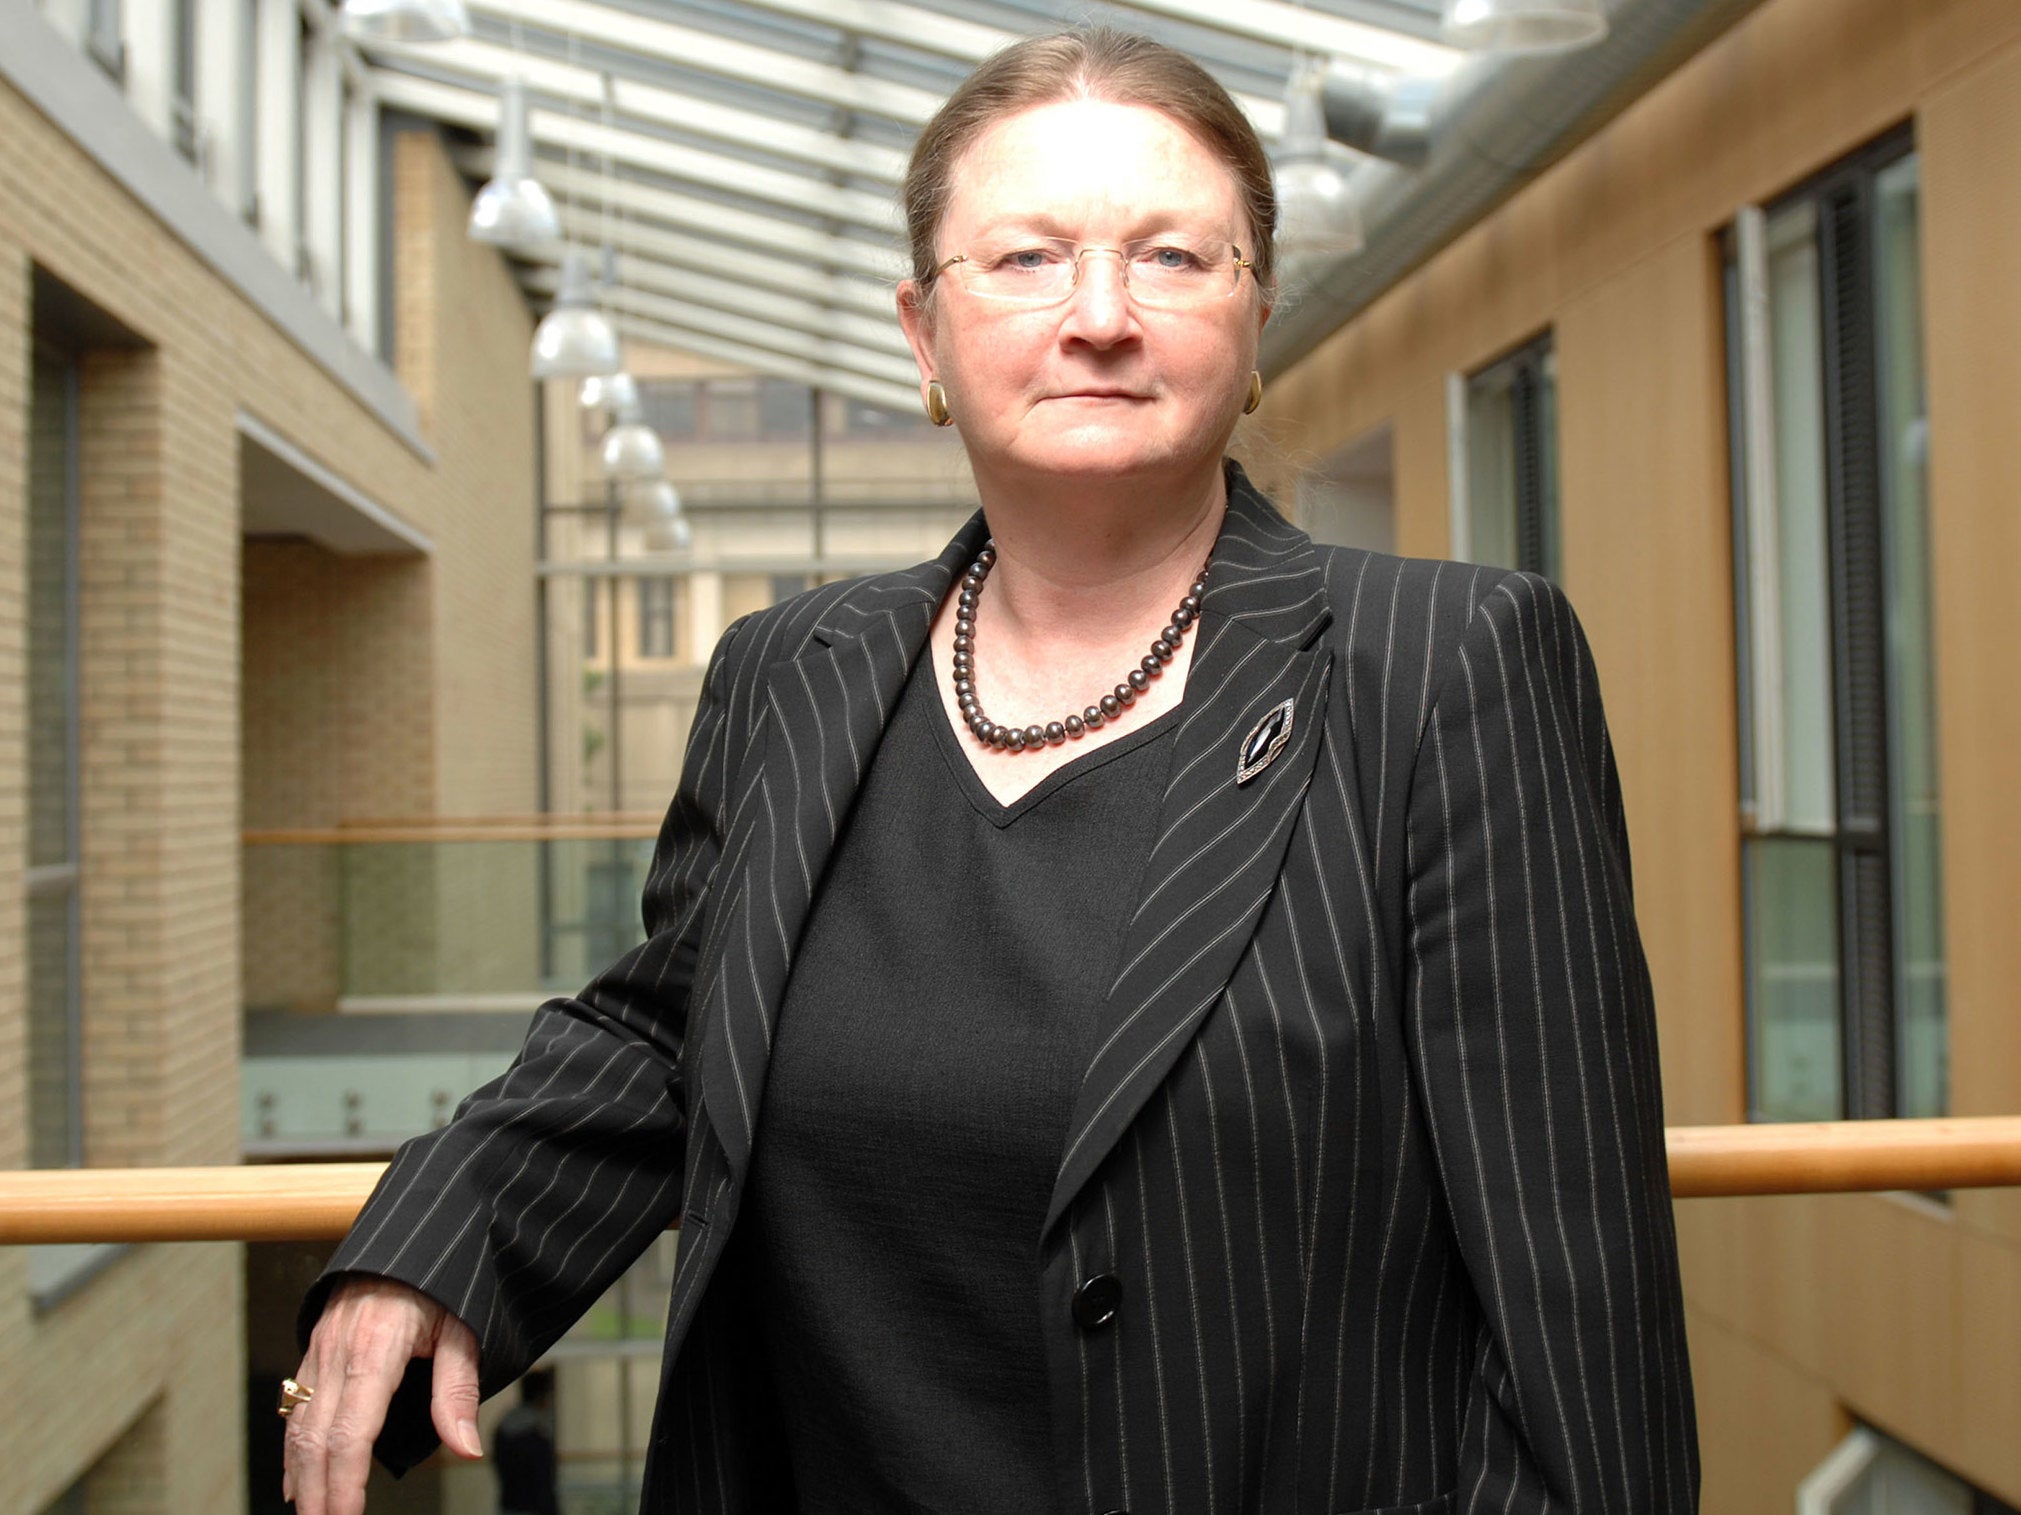 Professor Dame Glynis Breakwell, who is stepping down from the University of Bath's top job in August, takes home more than £468,000